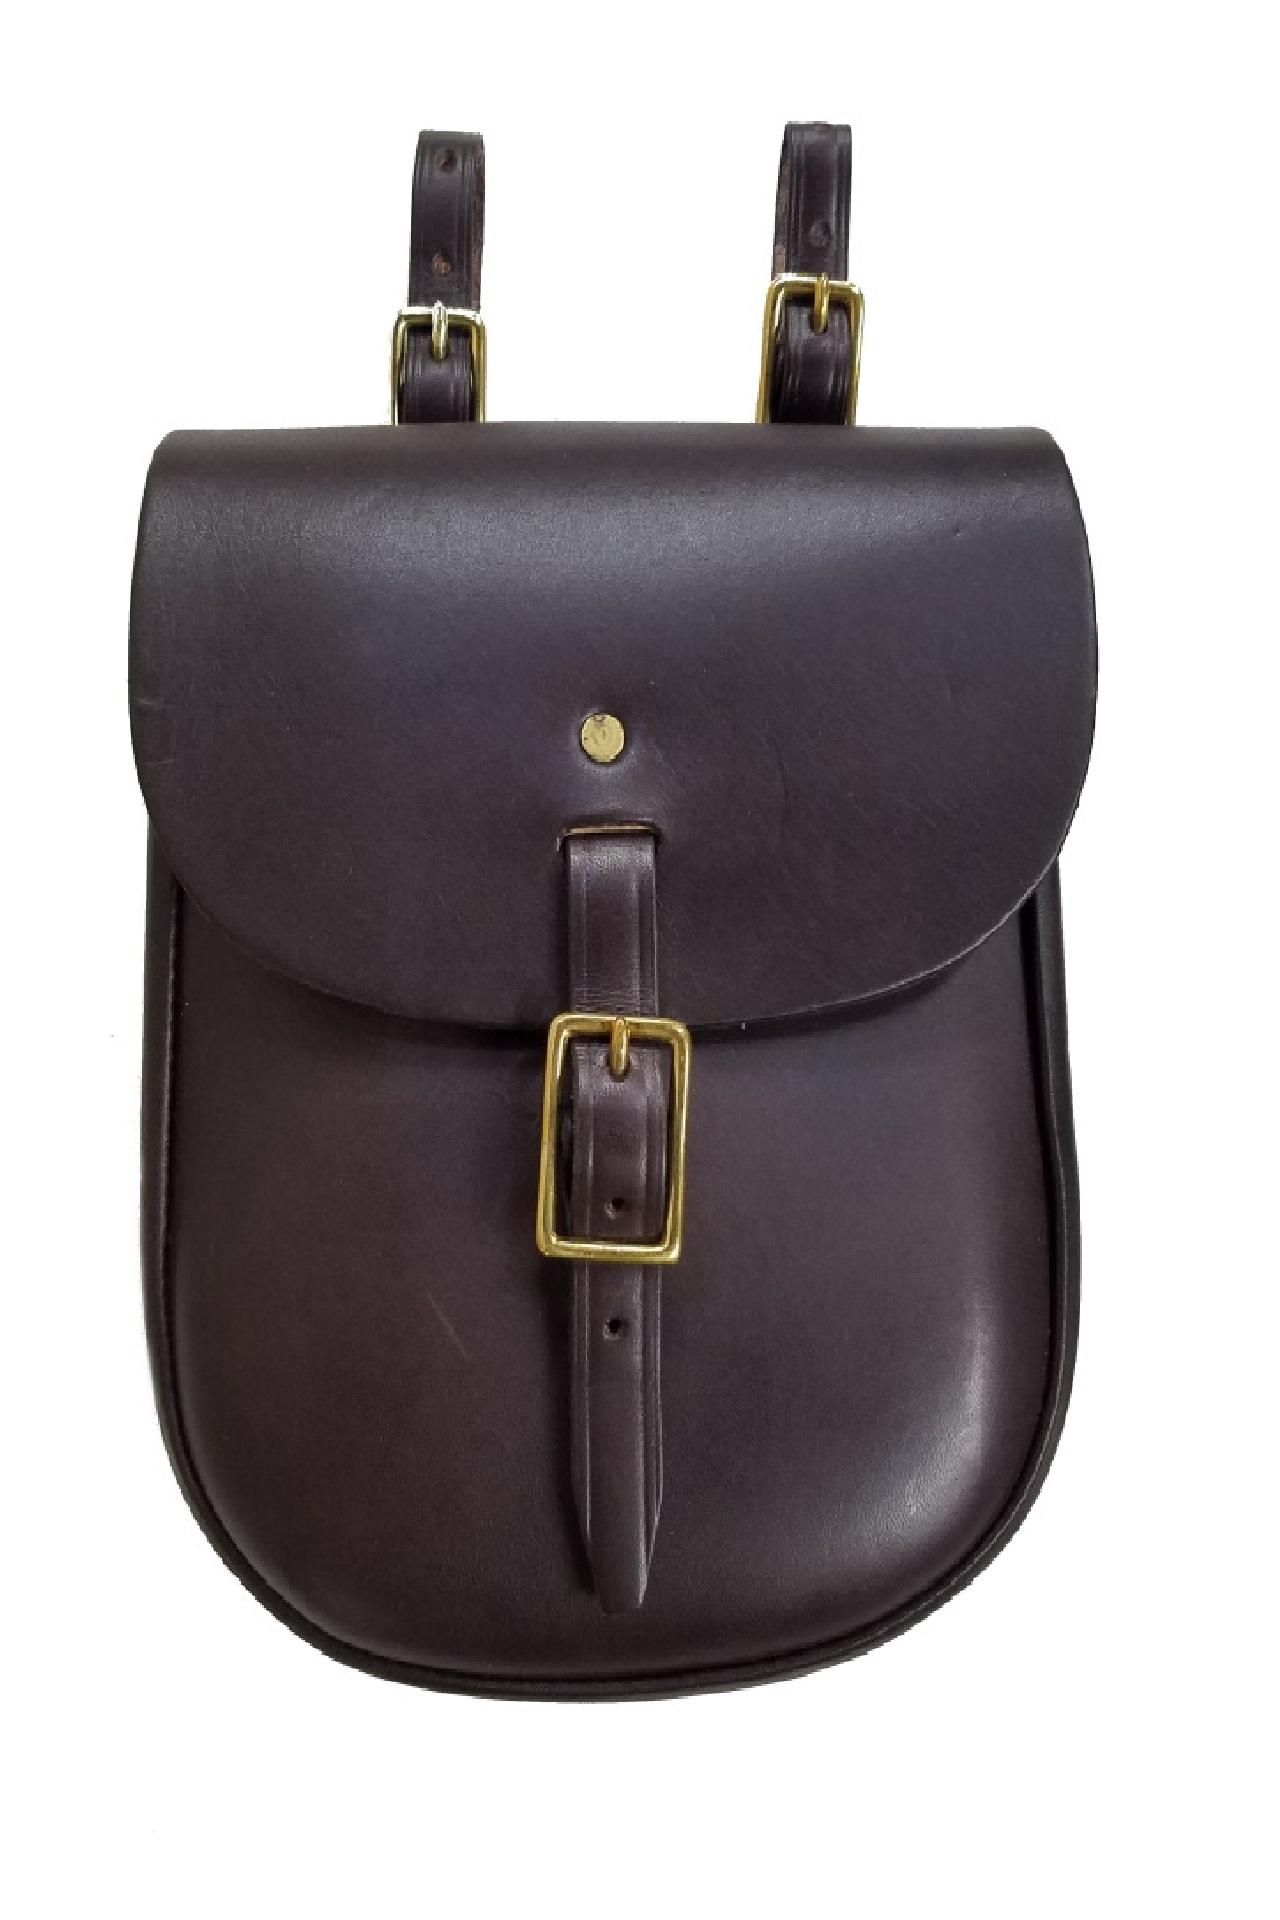 Canvas Trail Bag with Leather Accents - Gass Horse Supply & Western Wear